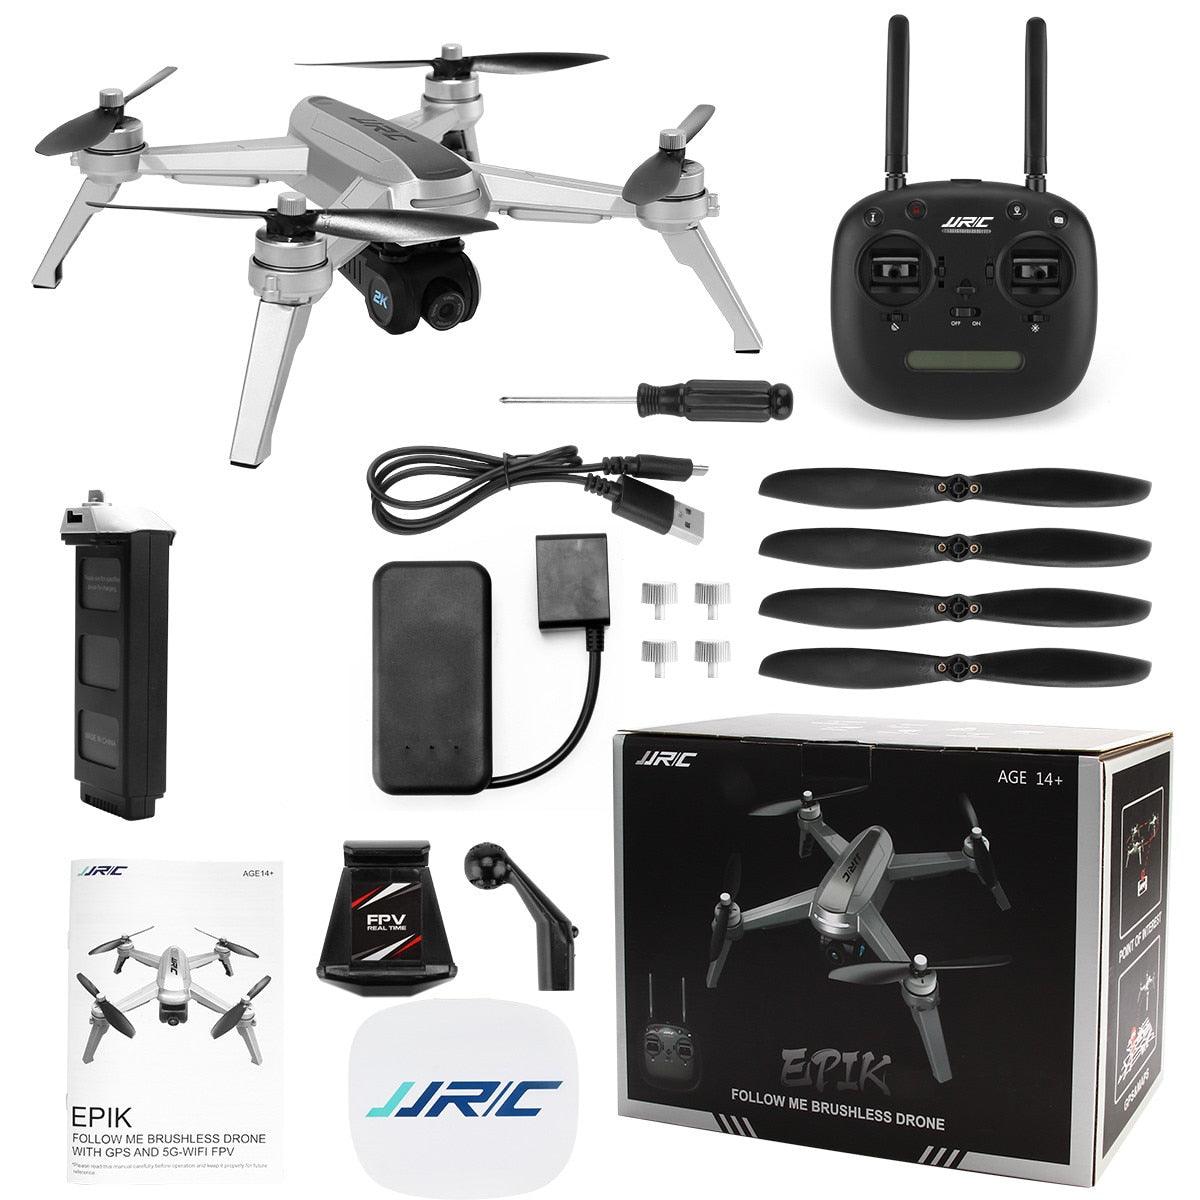 JJRC JJPRO X5 Drone - Brushless Drone with 2K FHD Camera Video 5G WiFi FPV GPS Drone for Adults, 30km/h 20 mins Flight Time Quadcopter - RCDrone